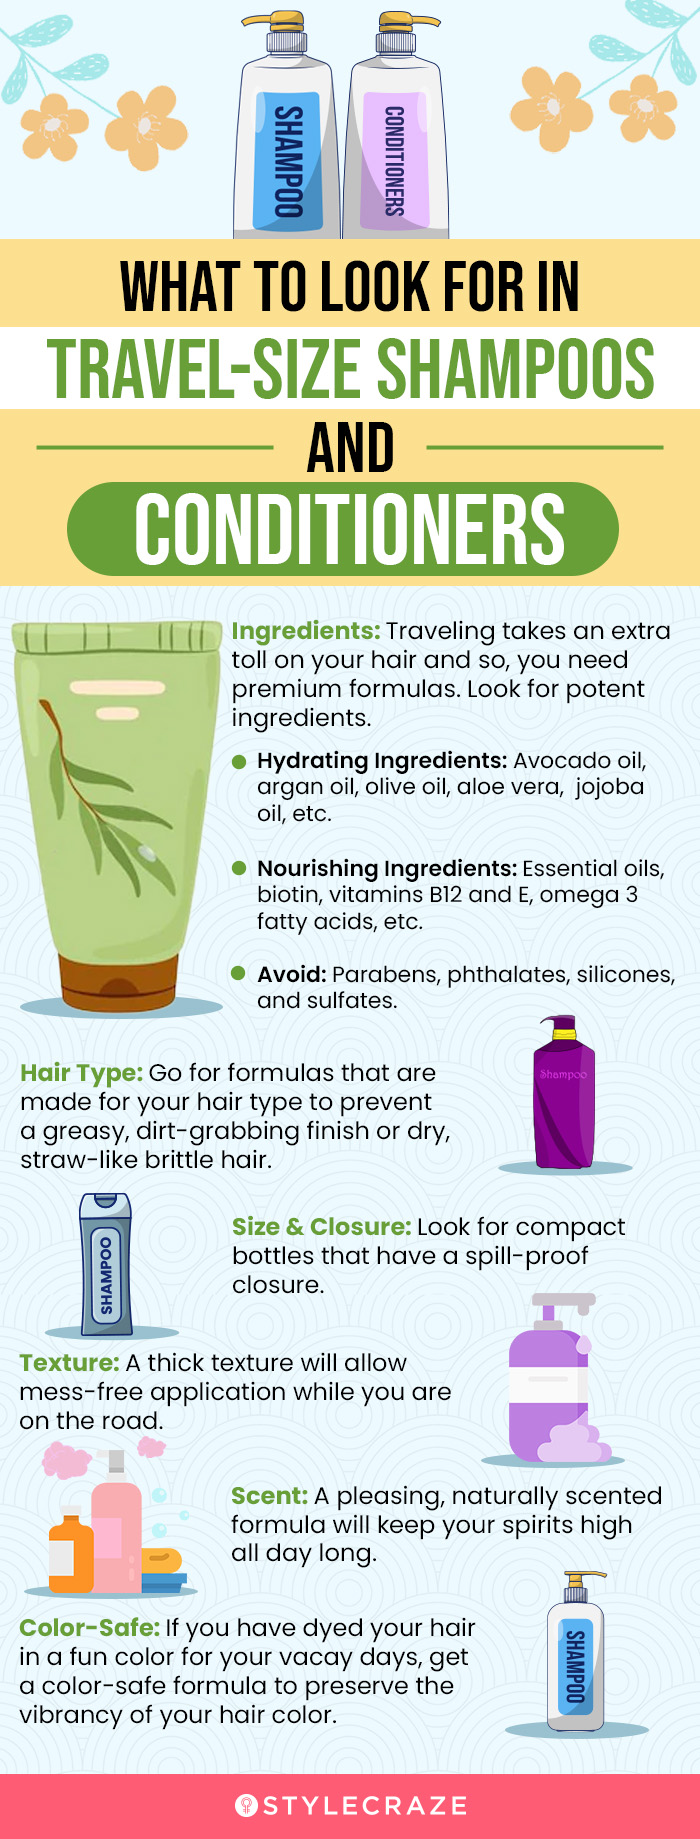 What To Look For In Travel-Size Shampoos And Conditioners [infographic]